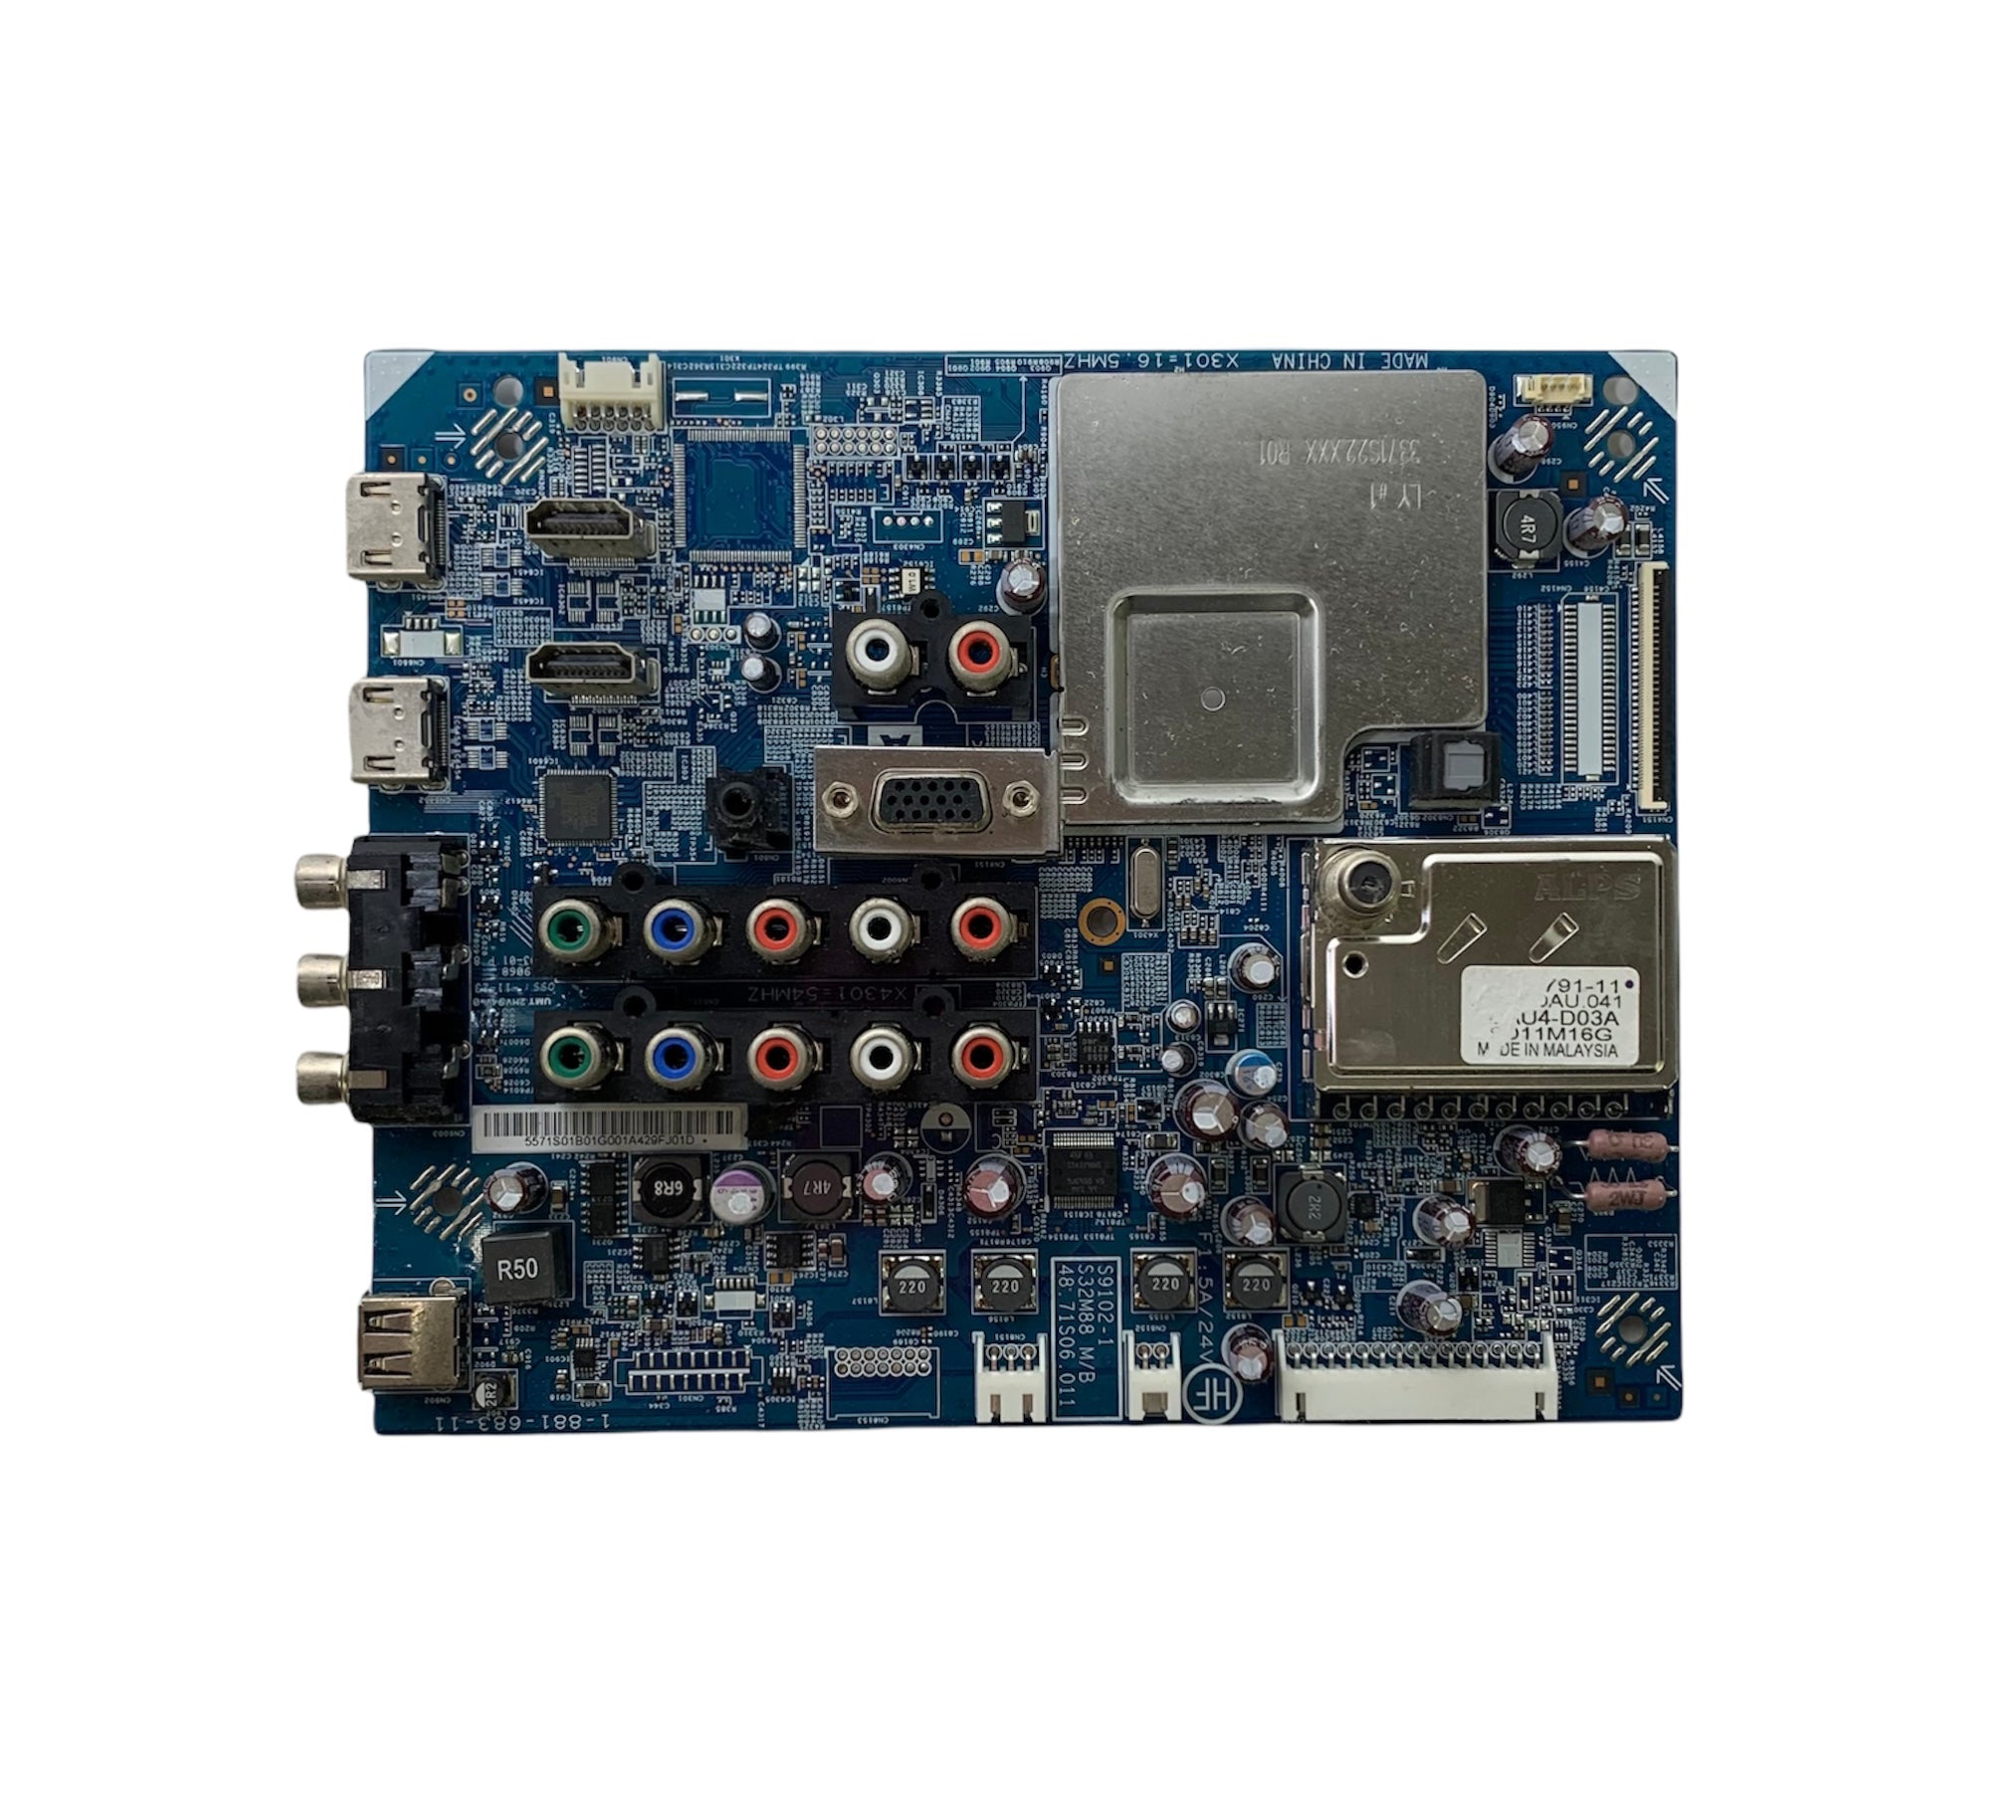 Sony 1-857-593-11 (S9102-1, S32M88) A Board for KDL-32EX301